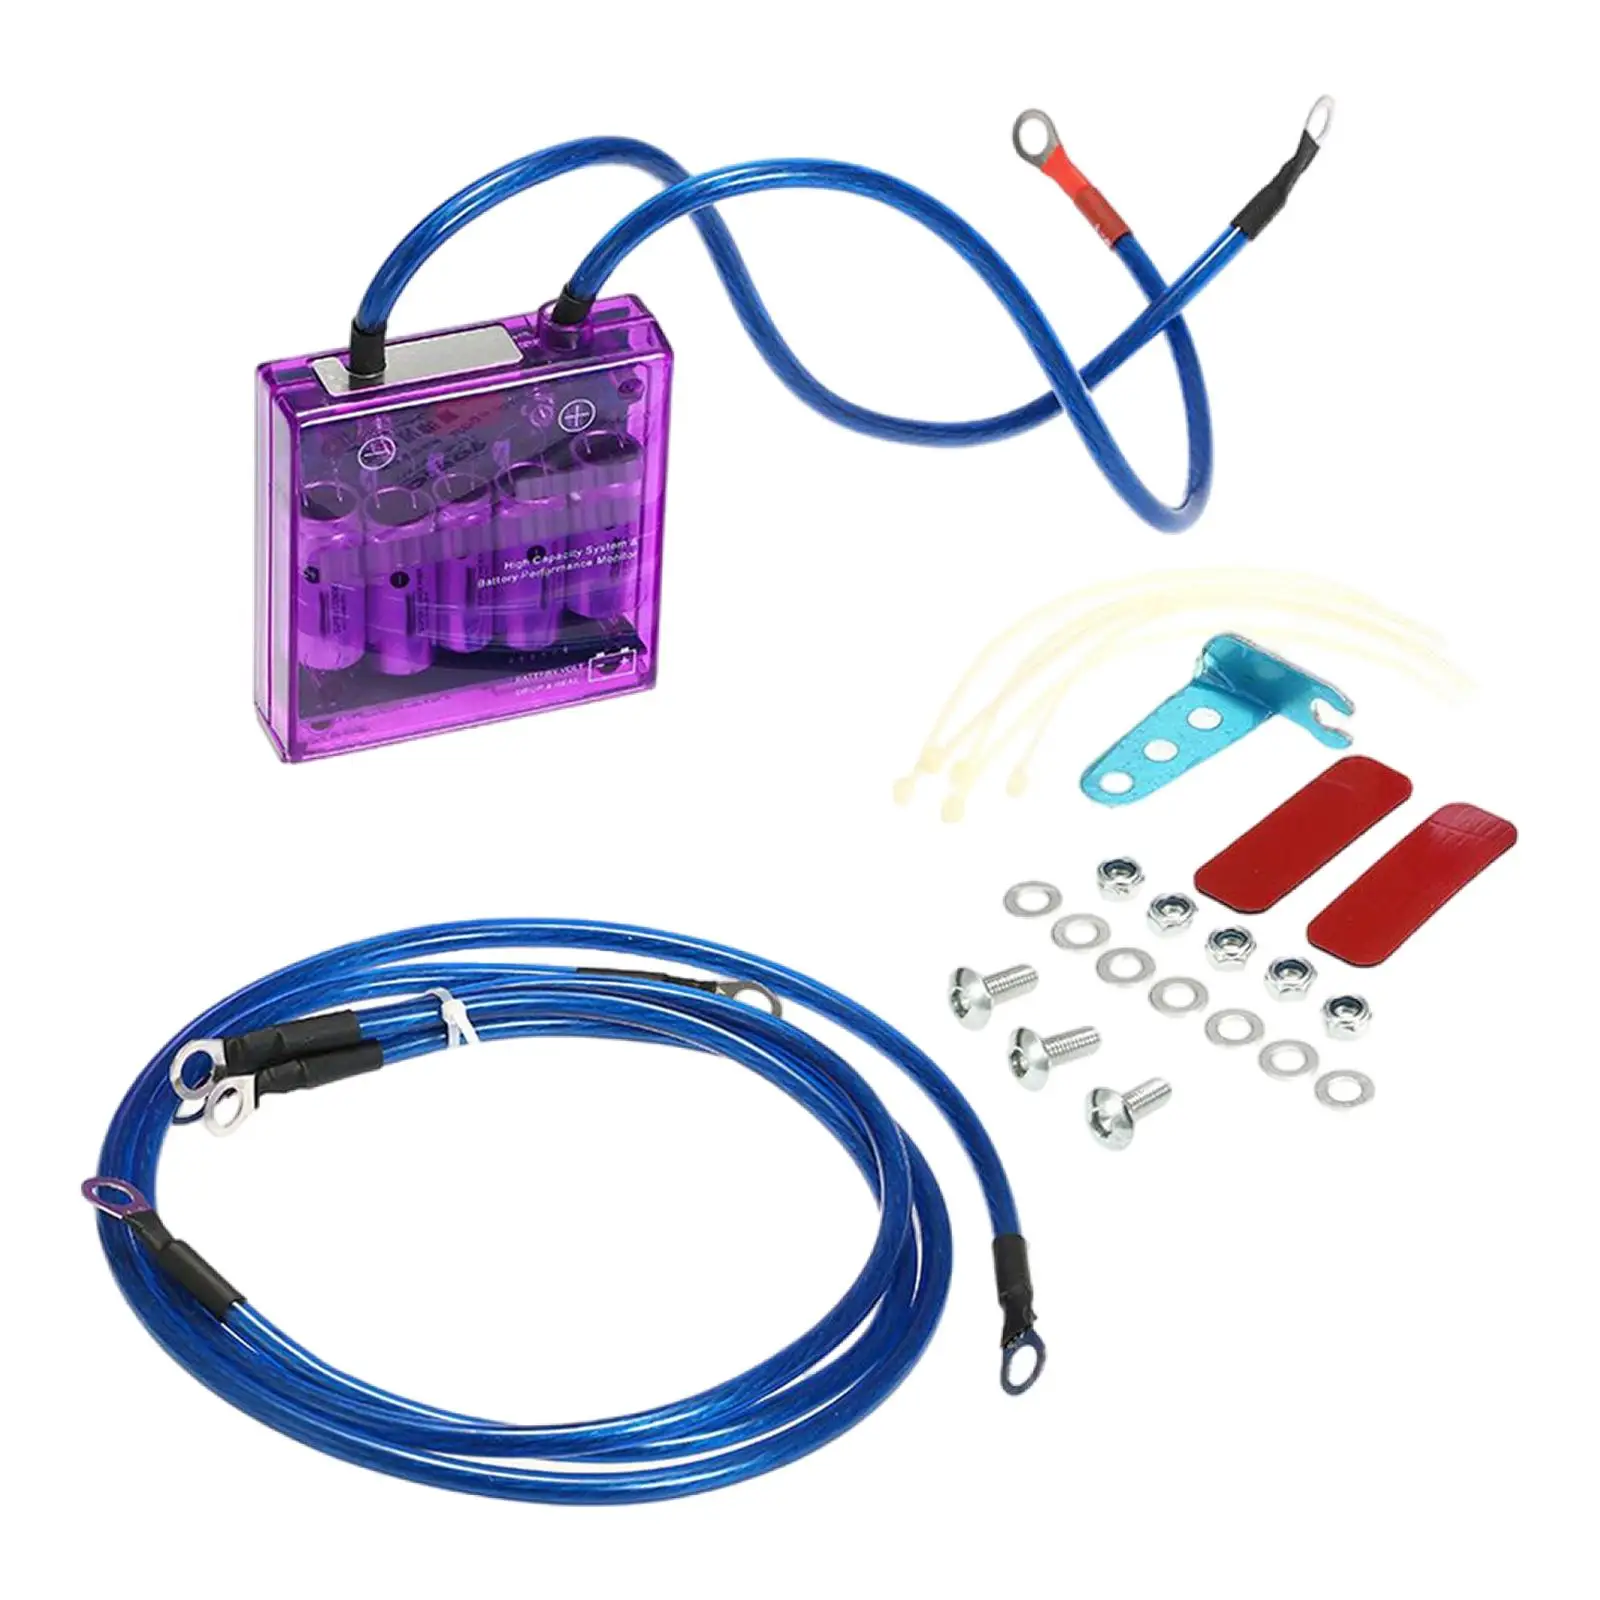 Universal Car Fuel Saver Voltage Stabilizer Regulator with Grounding Earth Cables Kit Purple